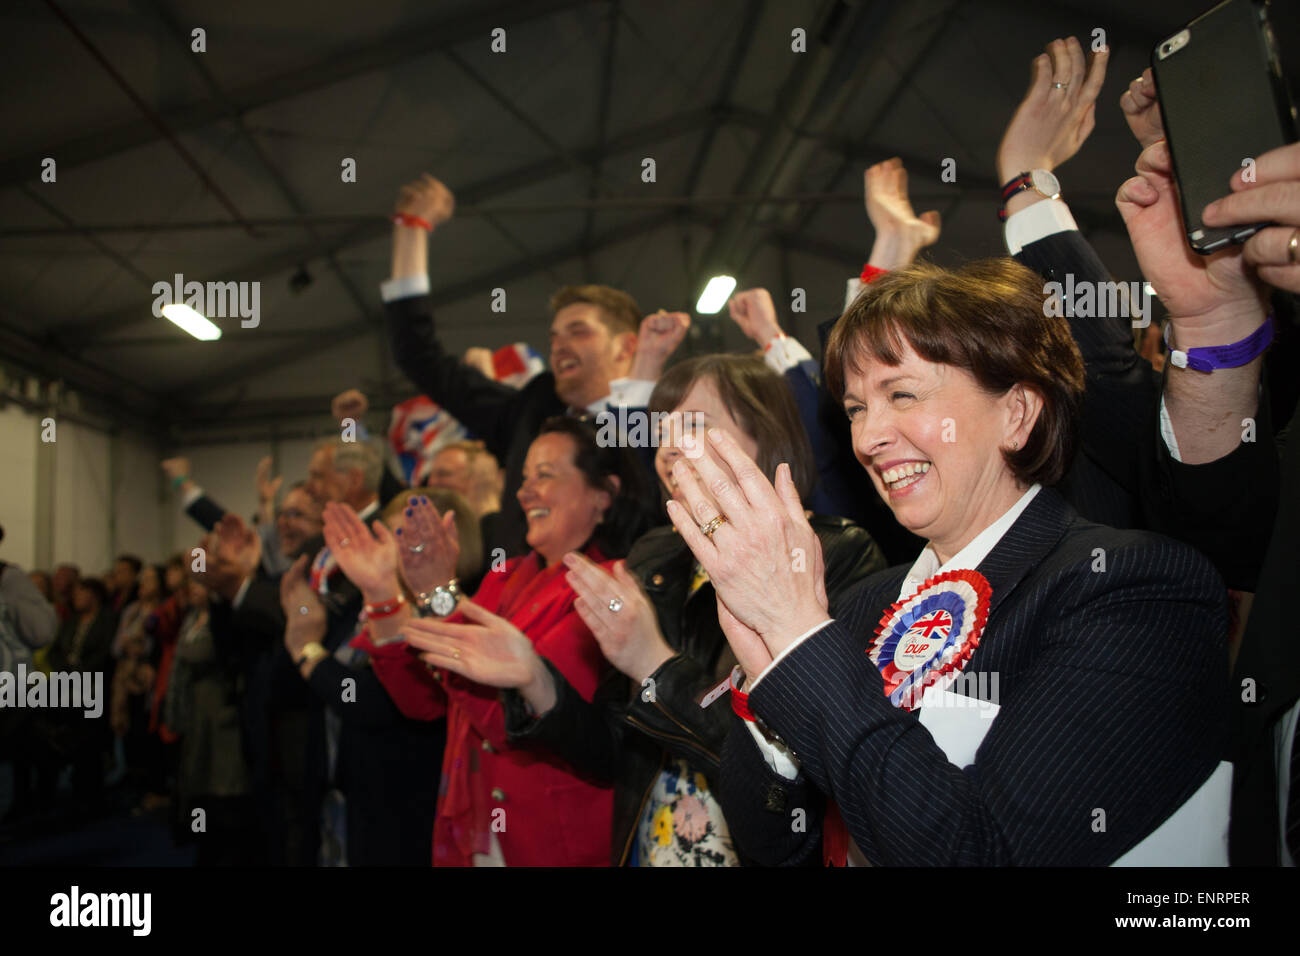 Belfast UK. 7th May 2015 General Election:  Diane Dodds with daughter celebrating after husband Nigel wins the Seat for Belfast Stock Photo